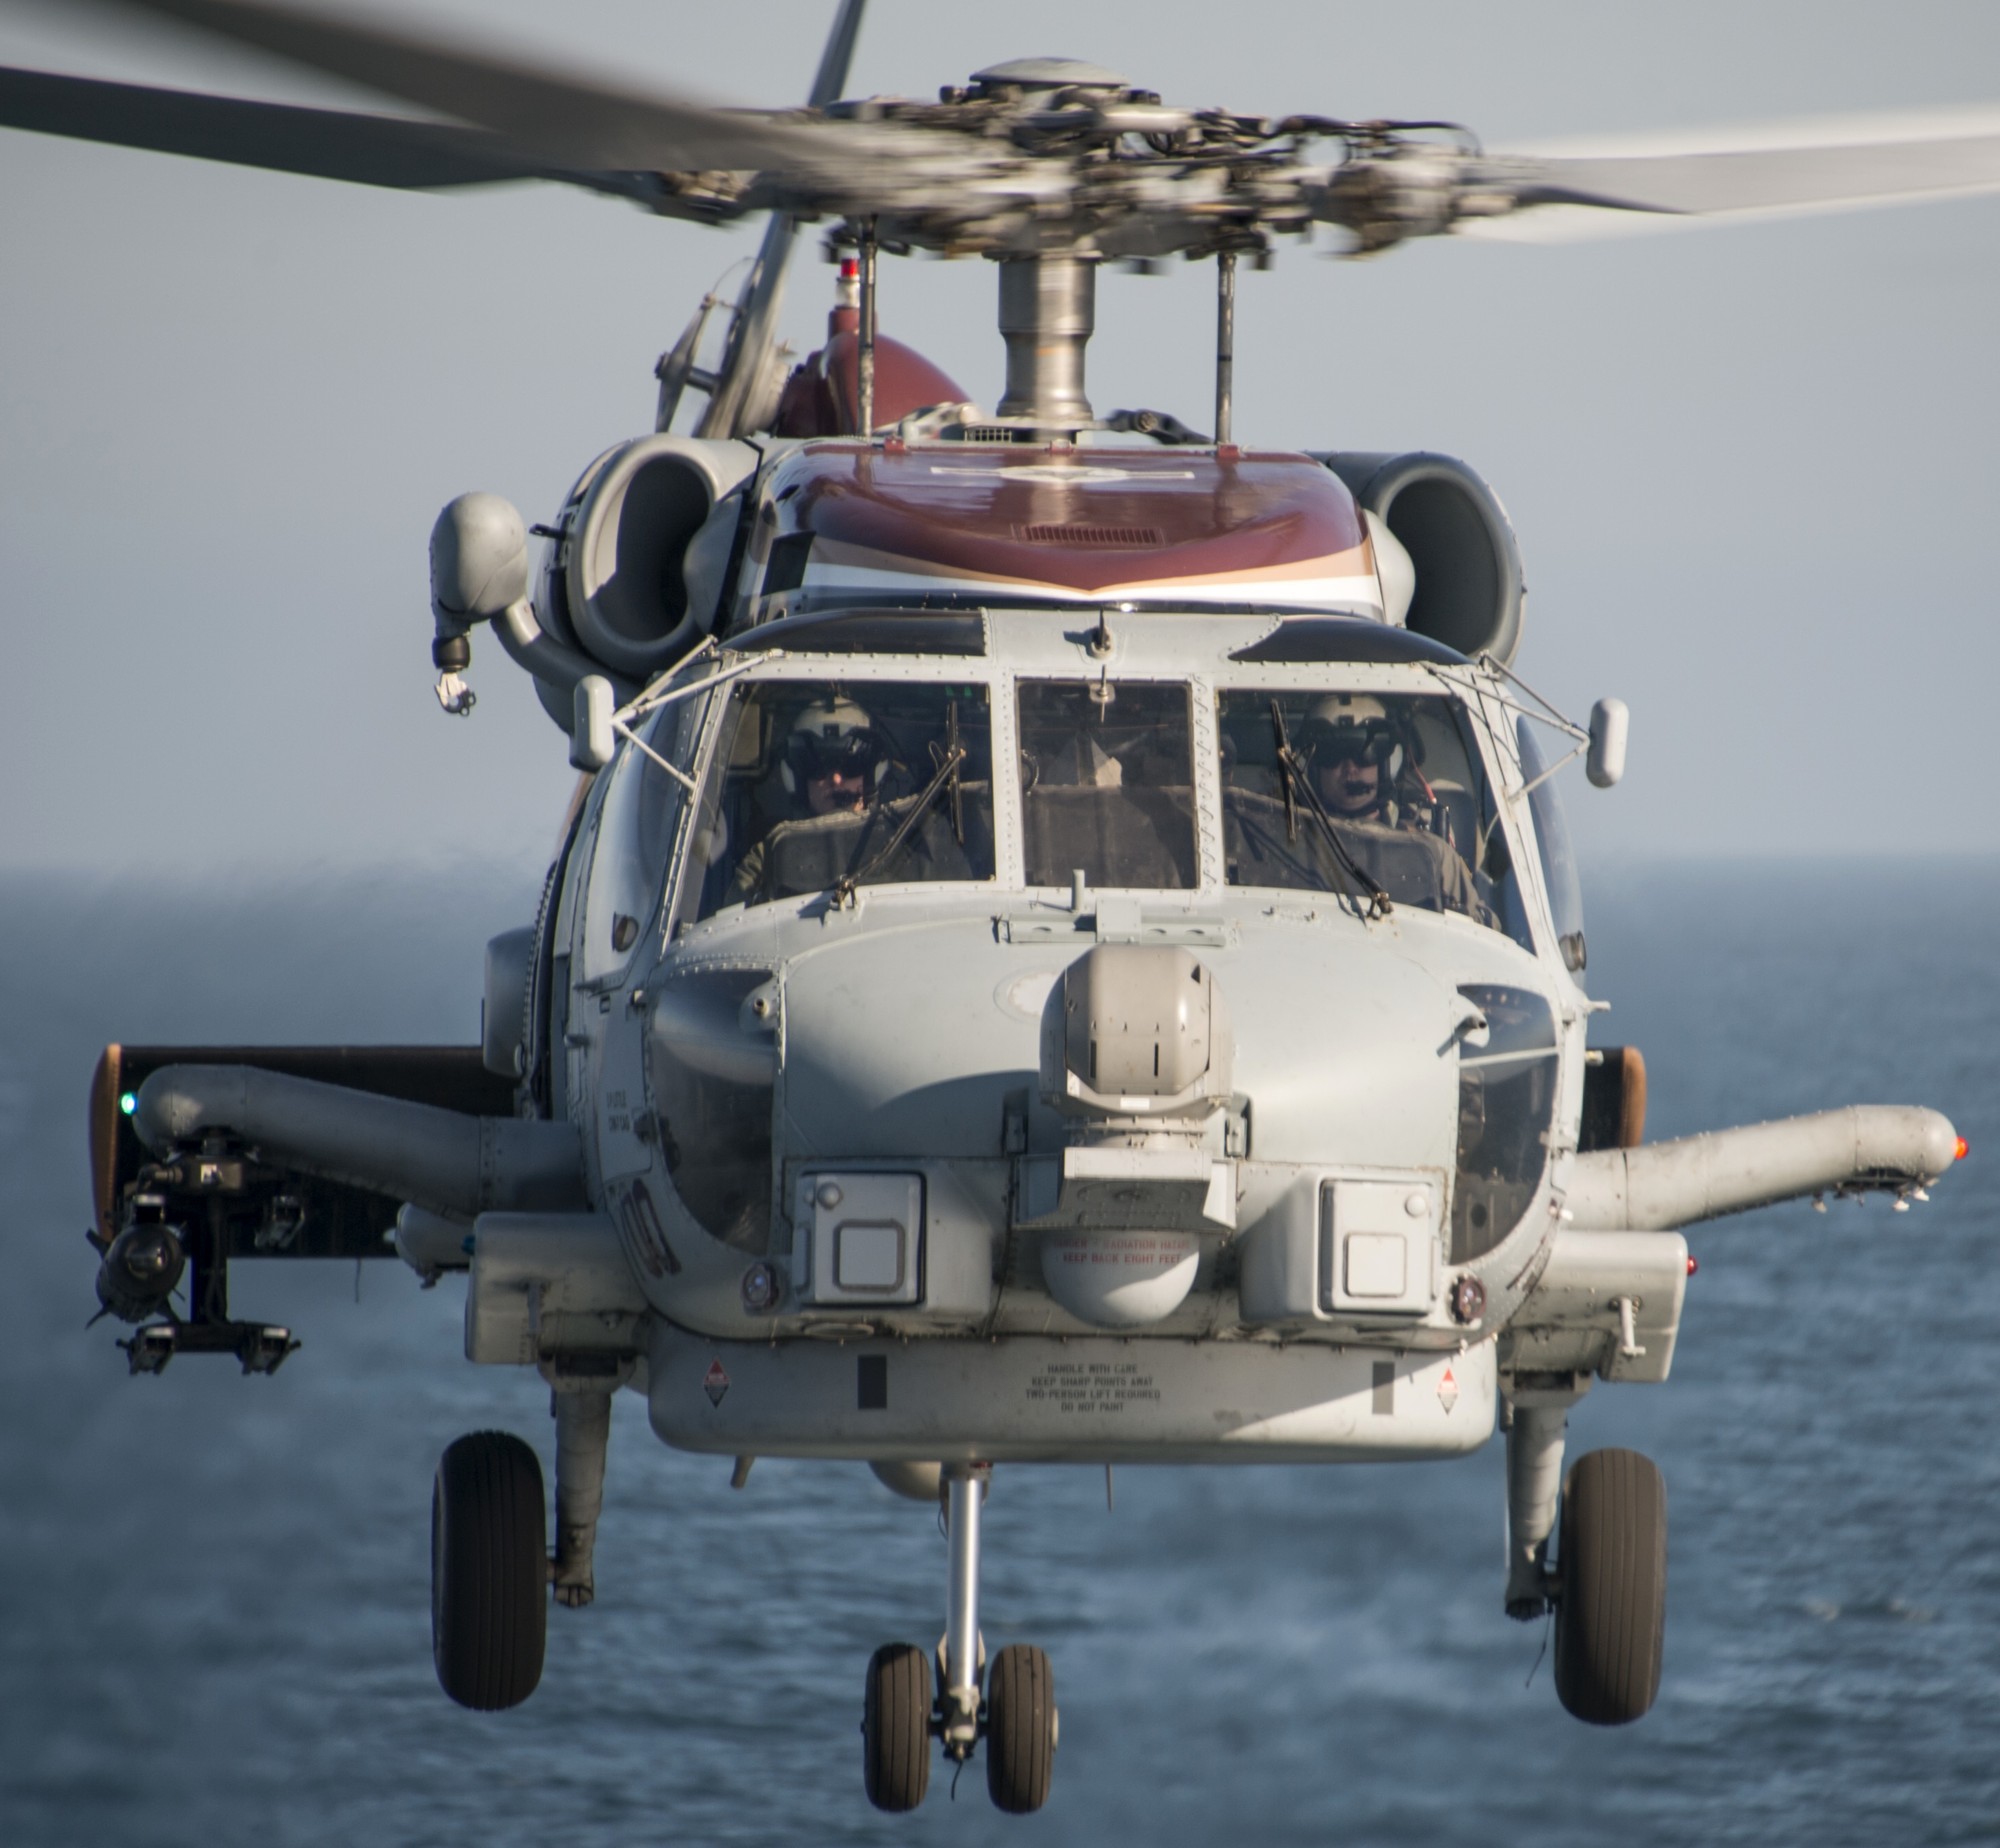 hsm-79 griffins helicopter maritime strike squadron mh-60r seahawk us navy 2017 04